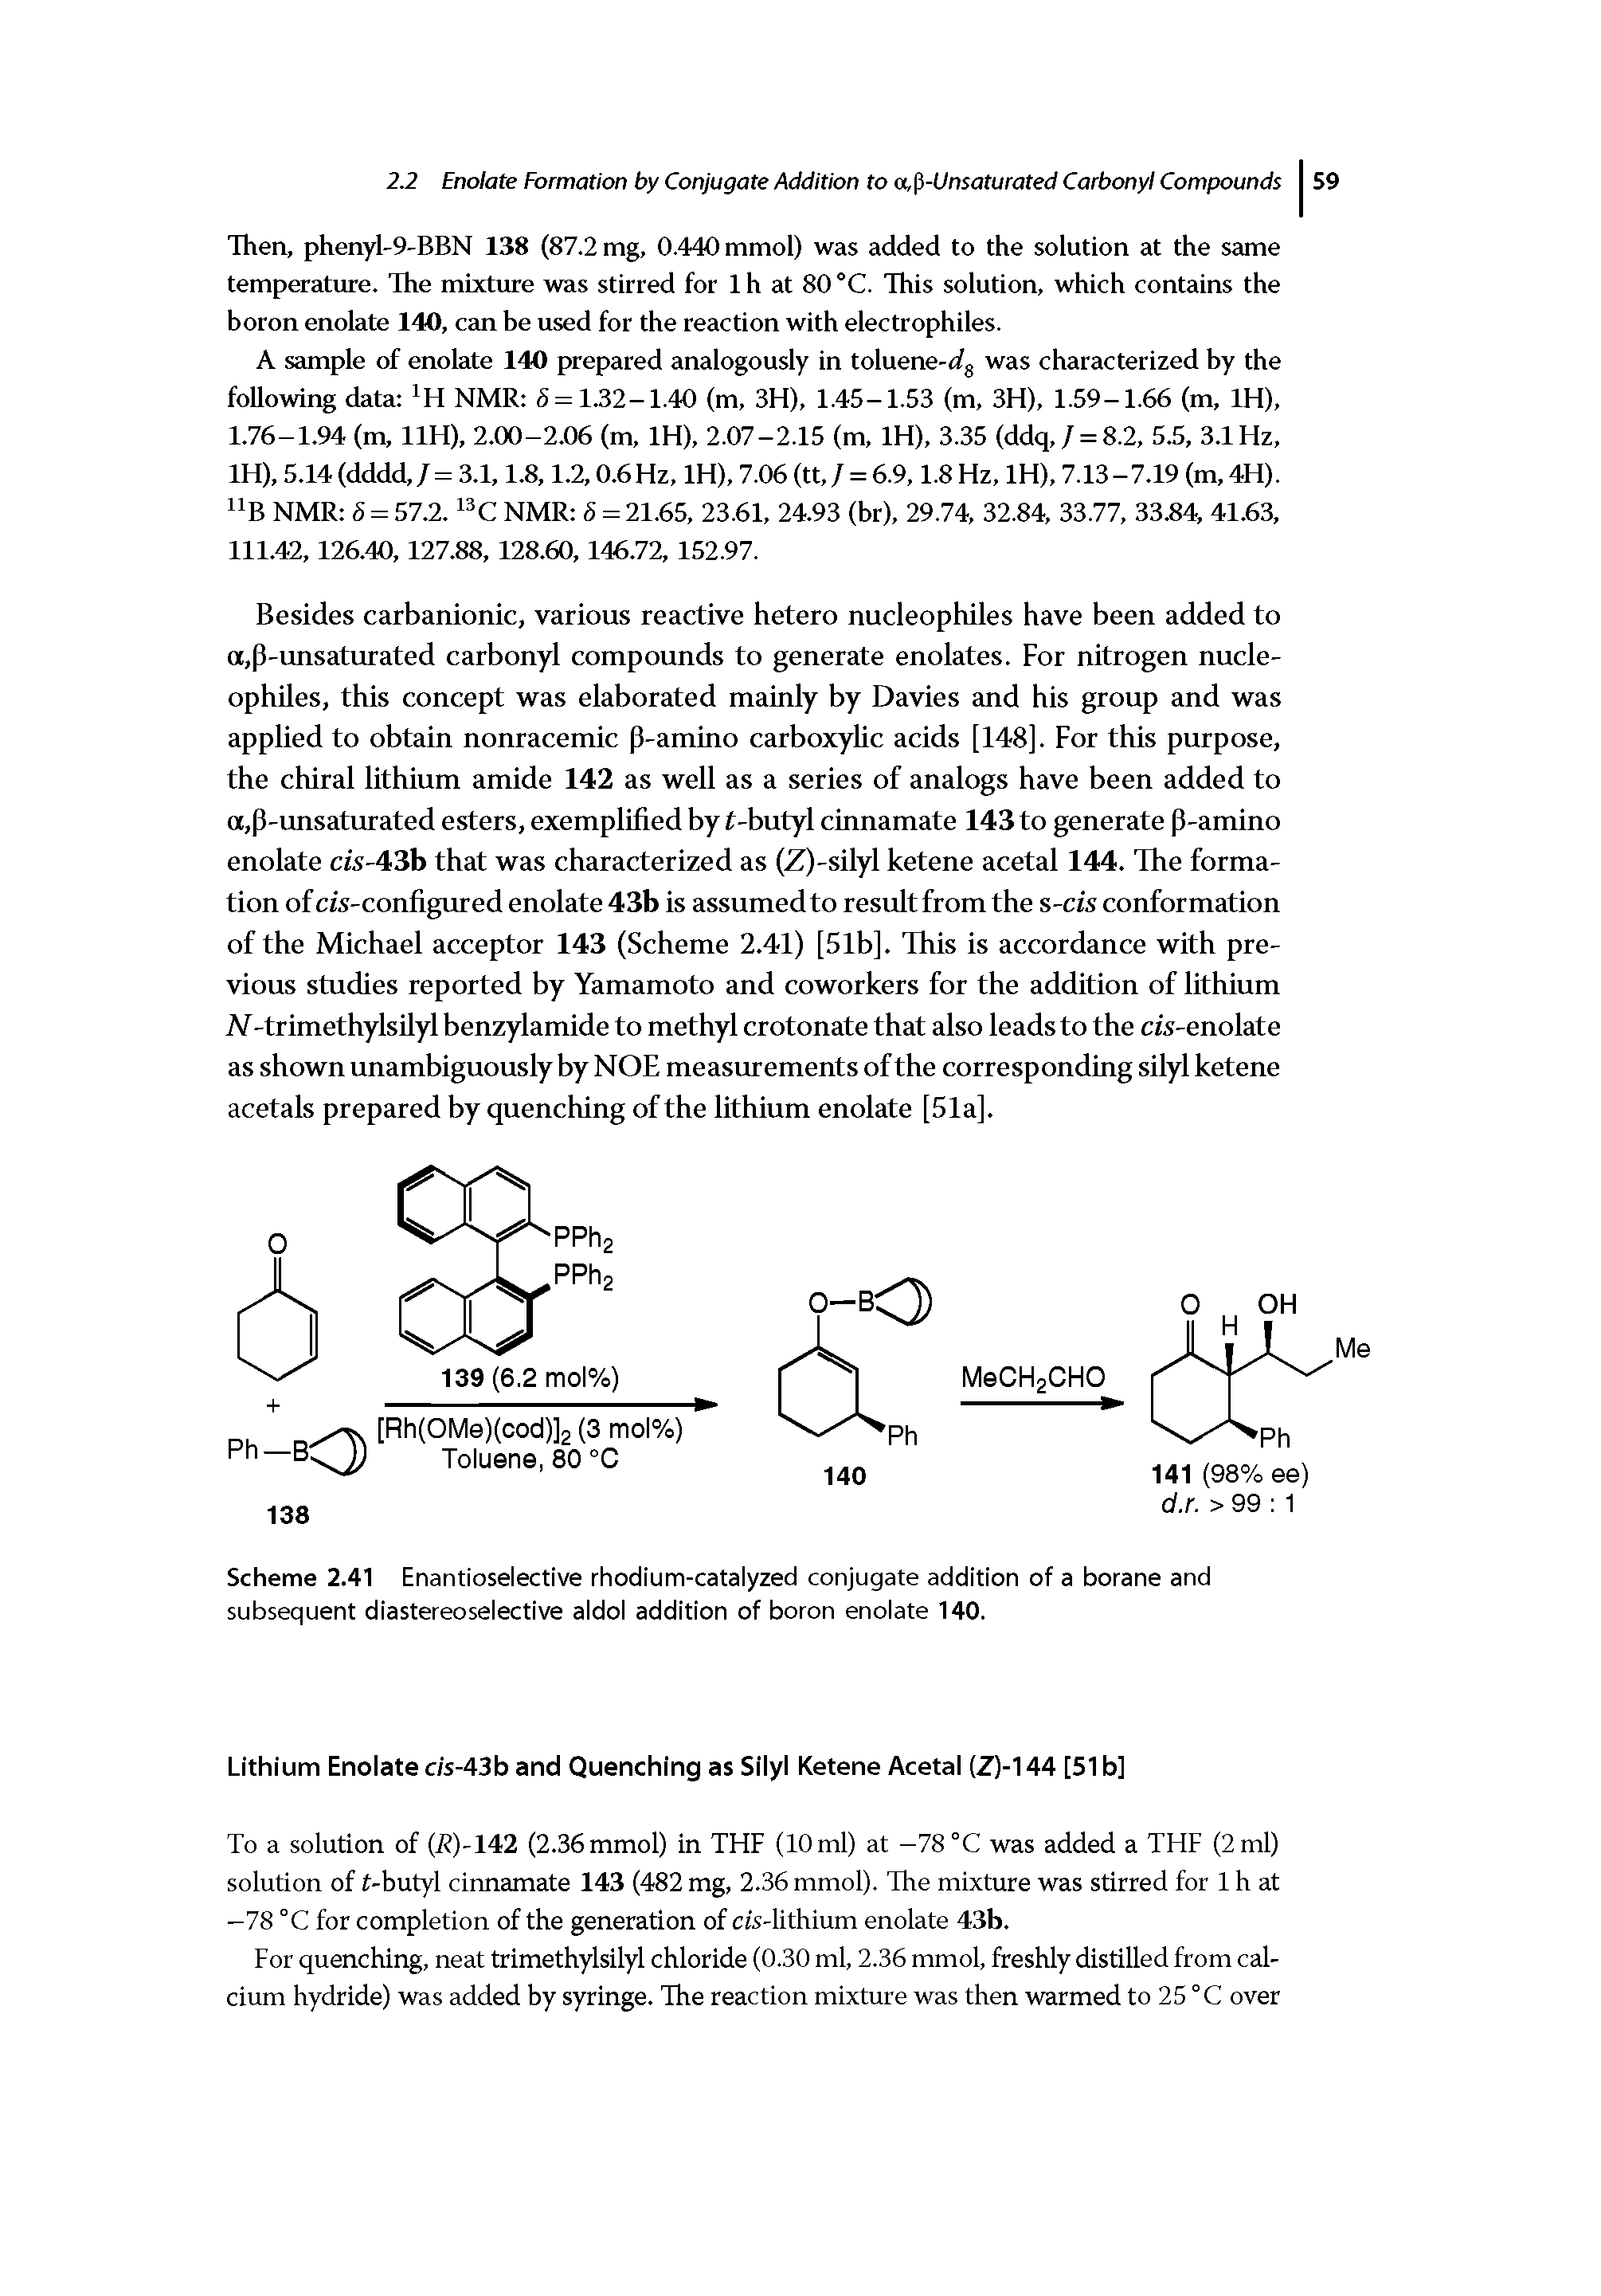 Scheme 2.41 Enantioselective rhodium-catalyzed conjugate addition of a borane and subsequent diastereoselective aldol addition of boron enolate 140.